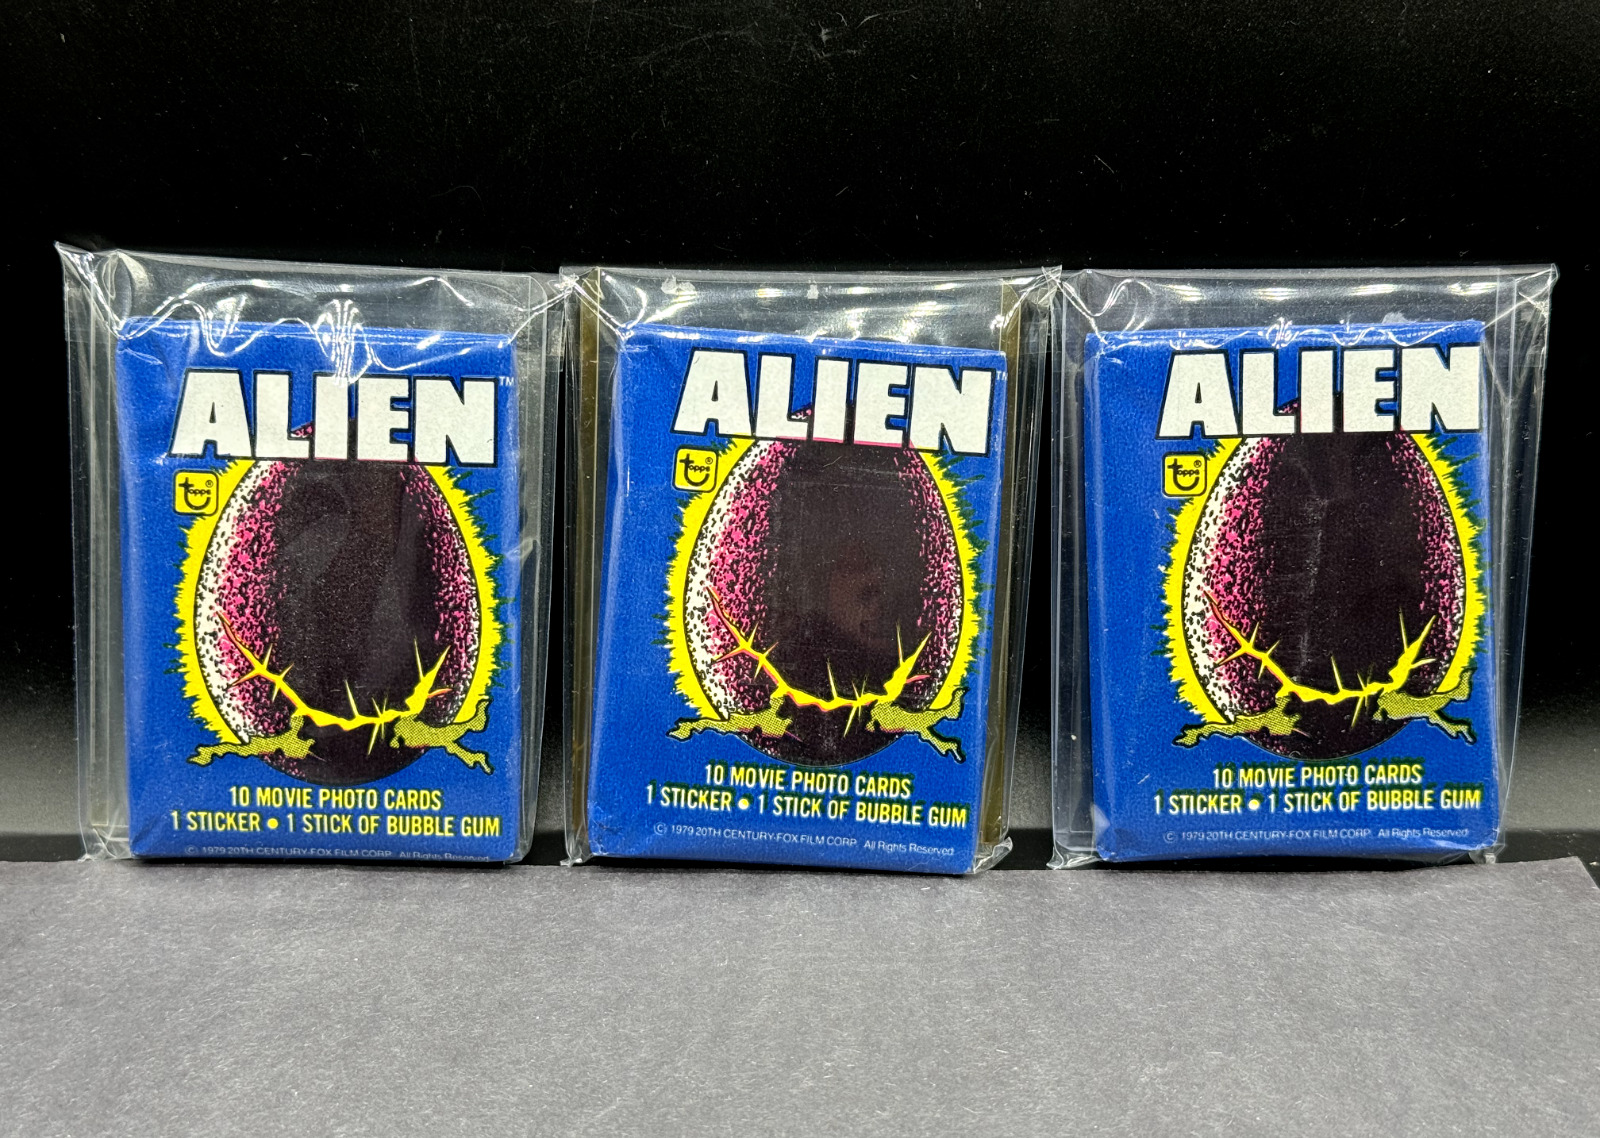 ALIEN 1979 Topps Unopened Lot of 3 Wax Packs Movie Photo Cards pulled from box